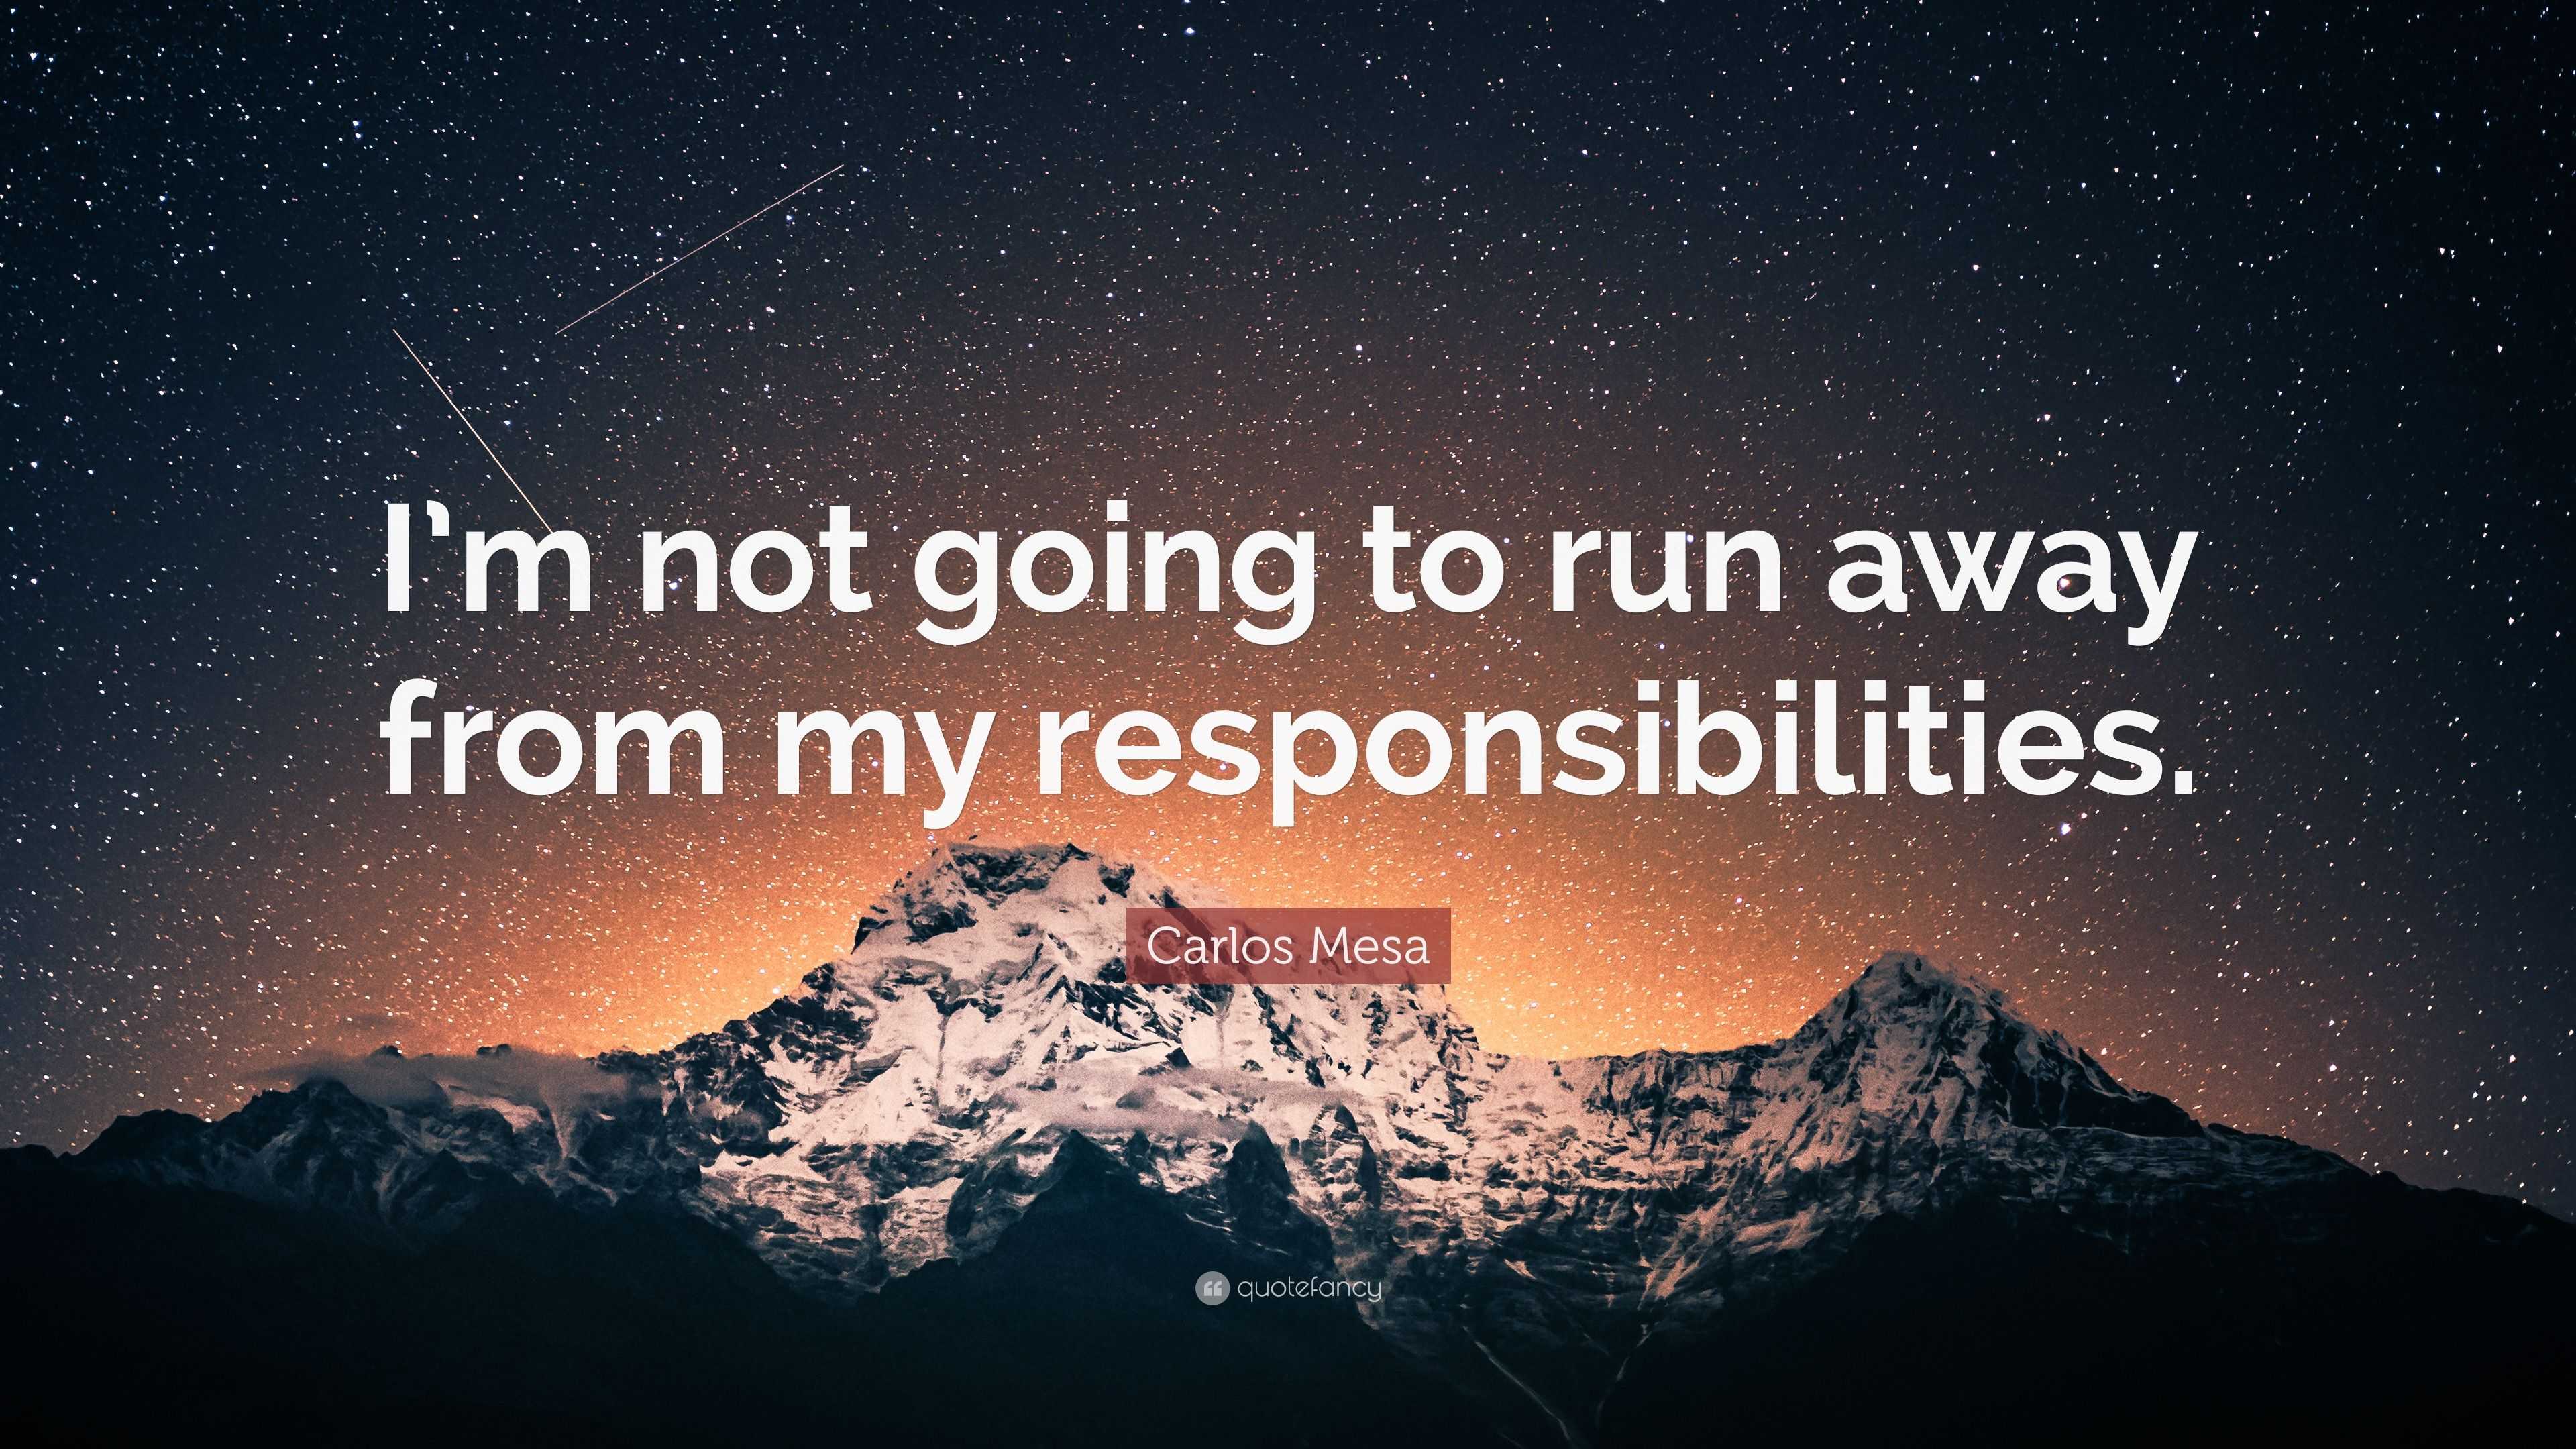 Carlos Mesa Quote: “I’m not going to run away from my responsibilities.”